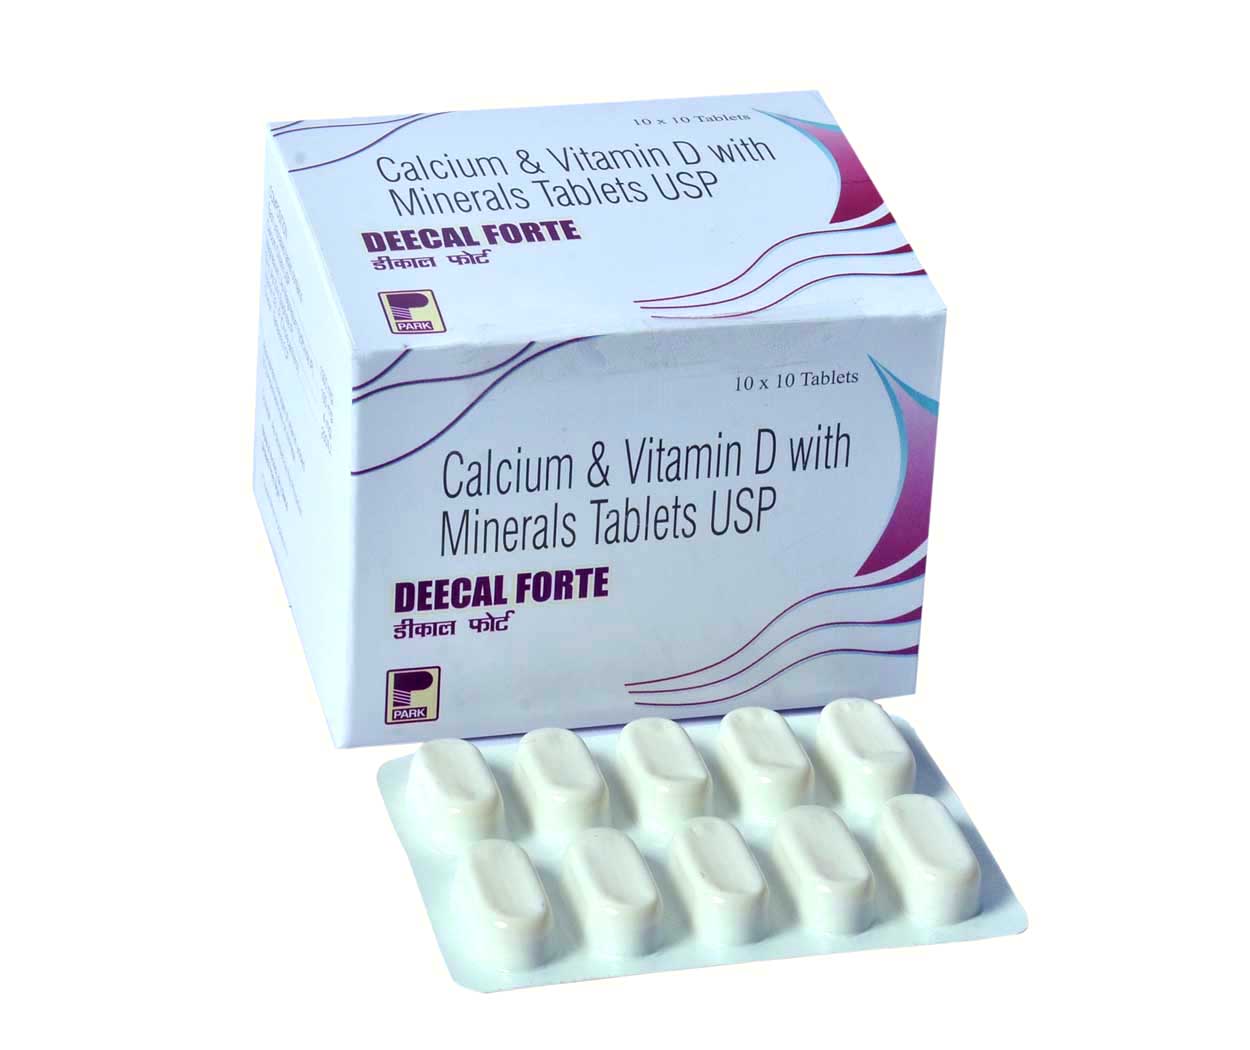 Product Name: DEECAL FORTE, Compositions of DEECAL FORTE are Calcium & Vitamin D with Minerals Tablets USP - Park Pharmaceuticals